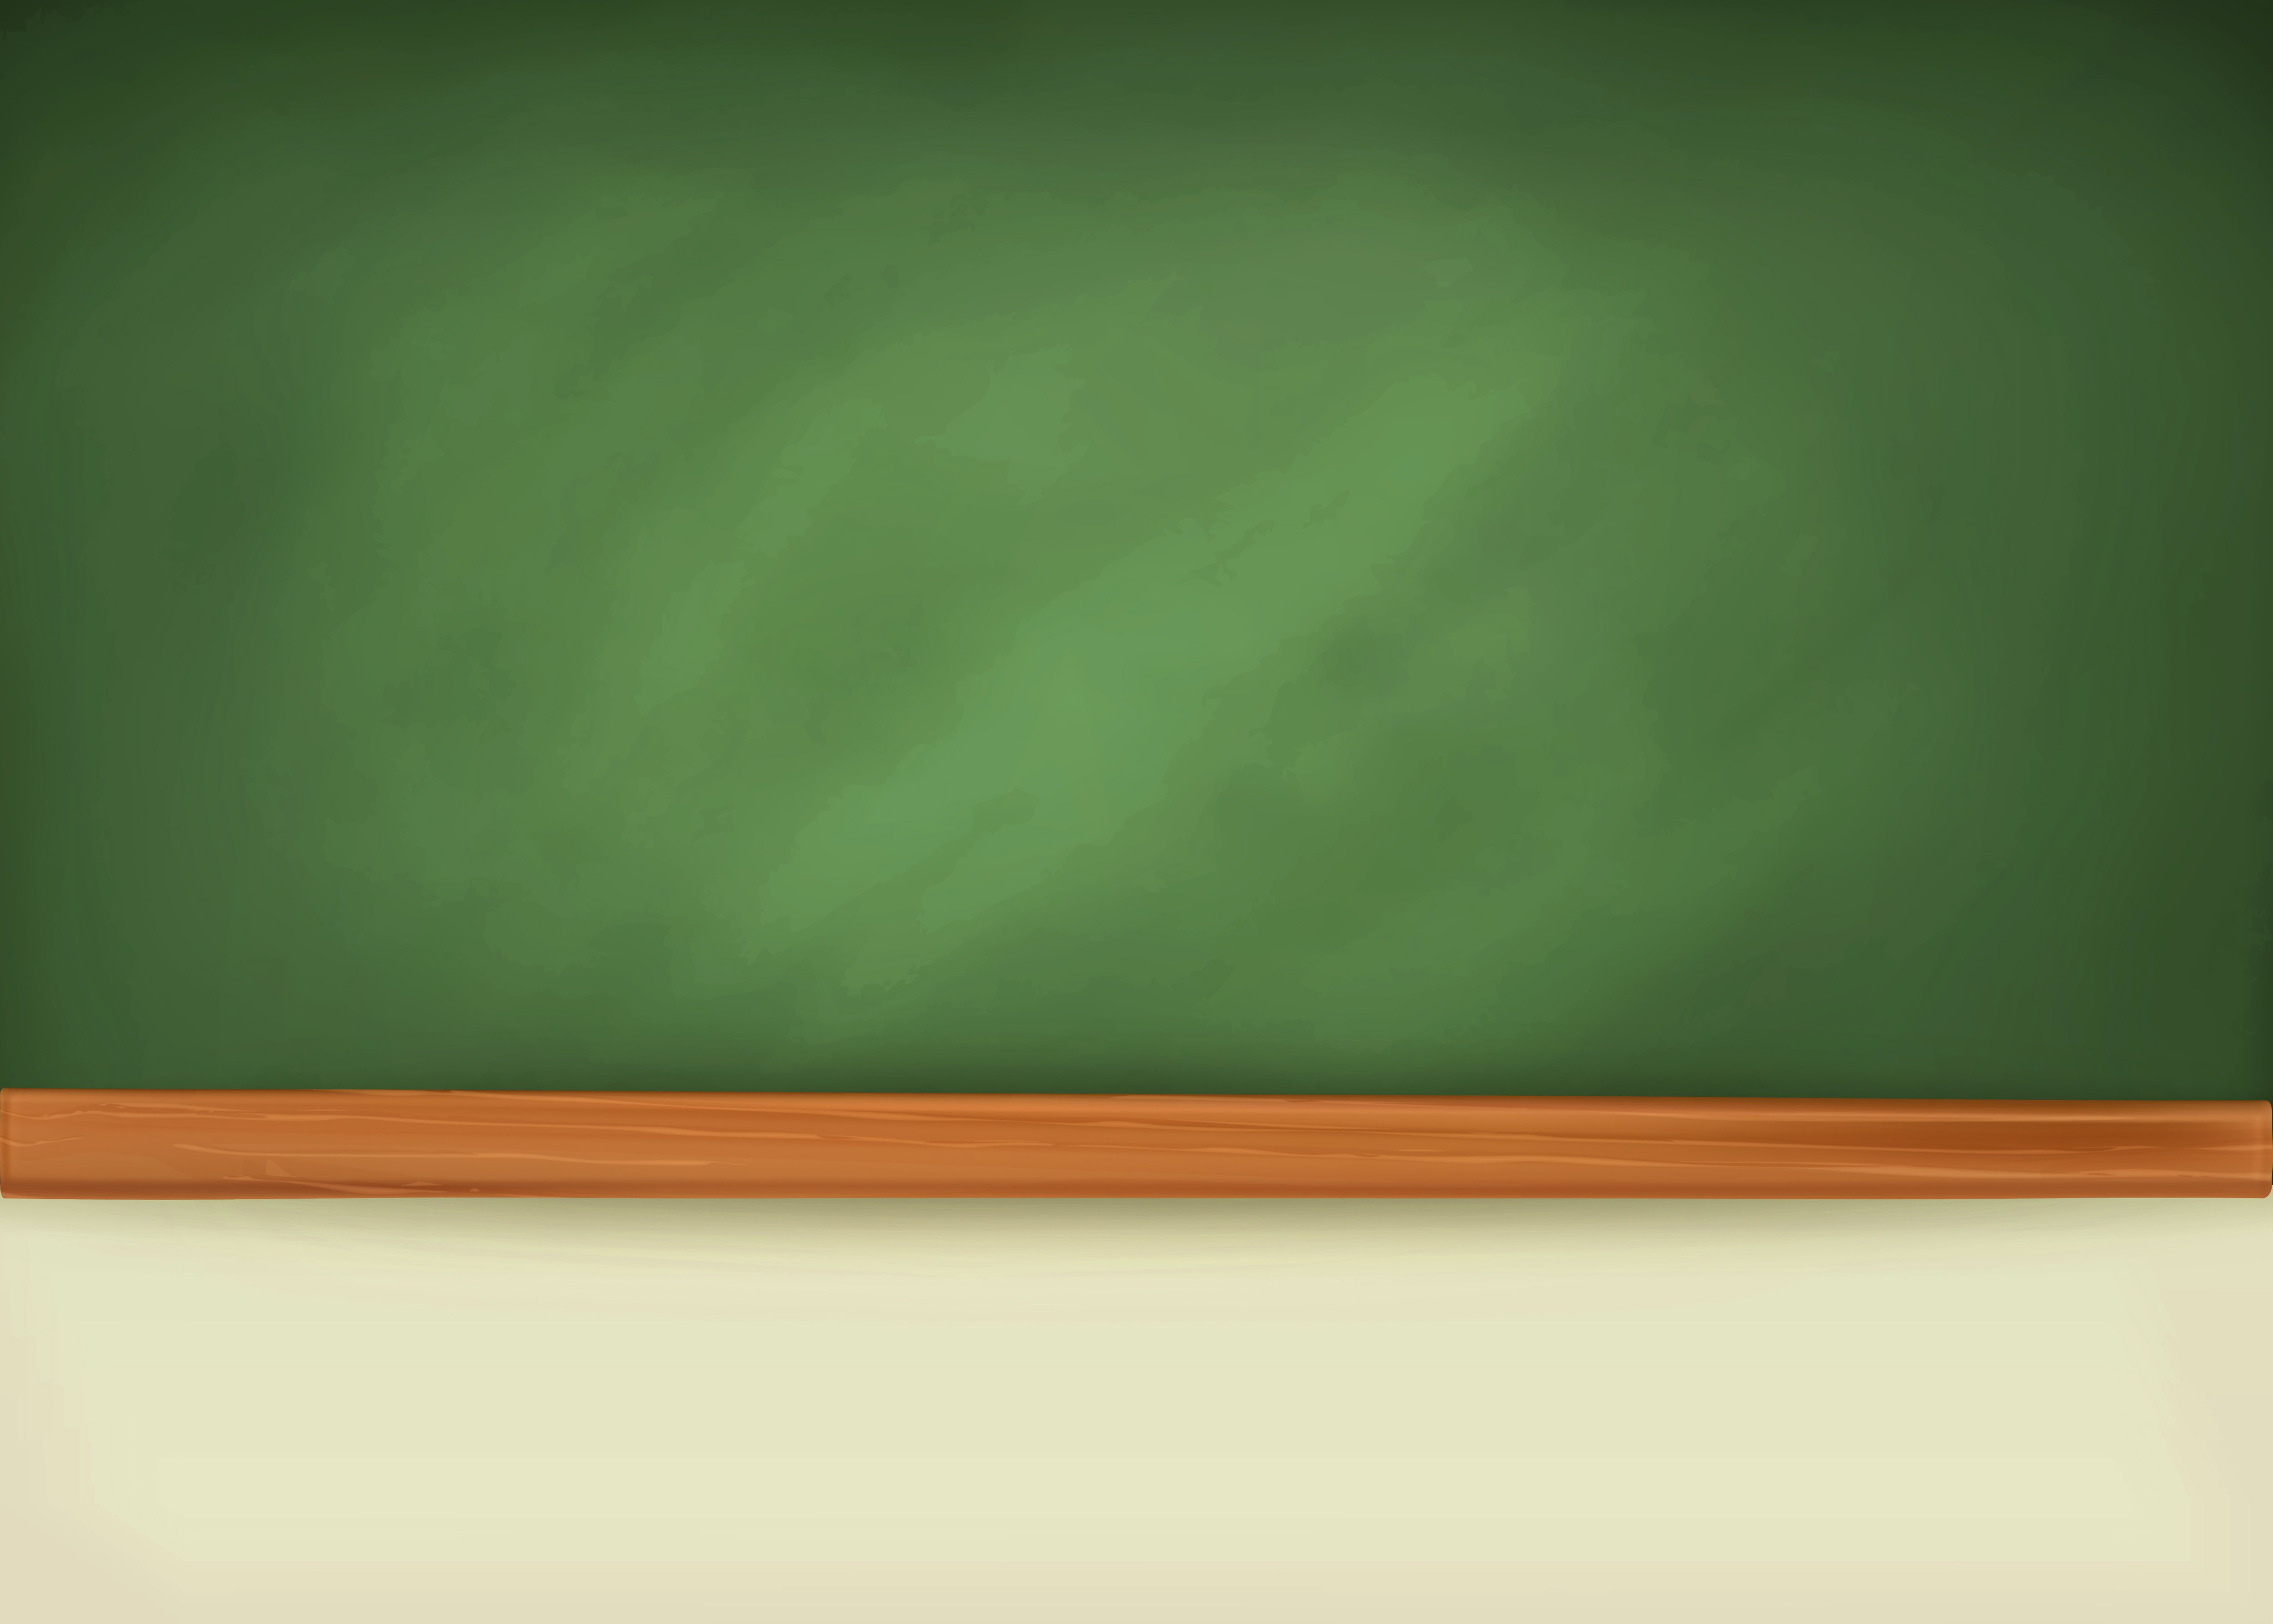 School Board Background Gallery Yopriceville   High Quality